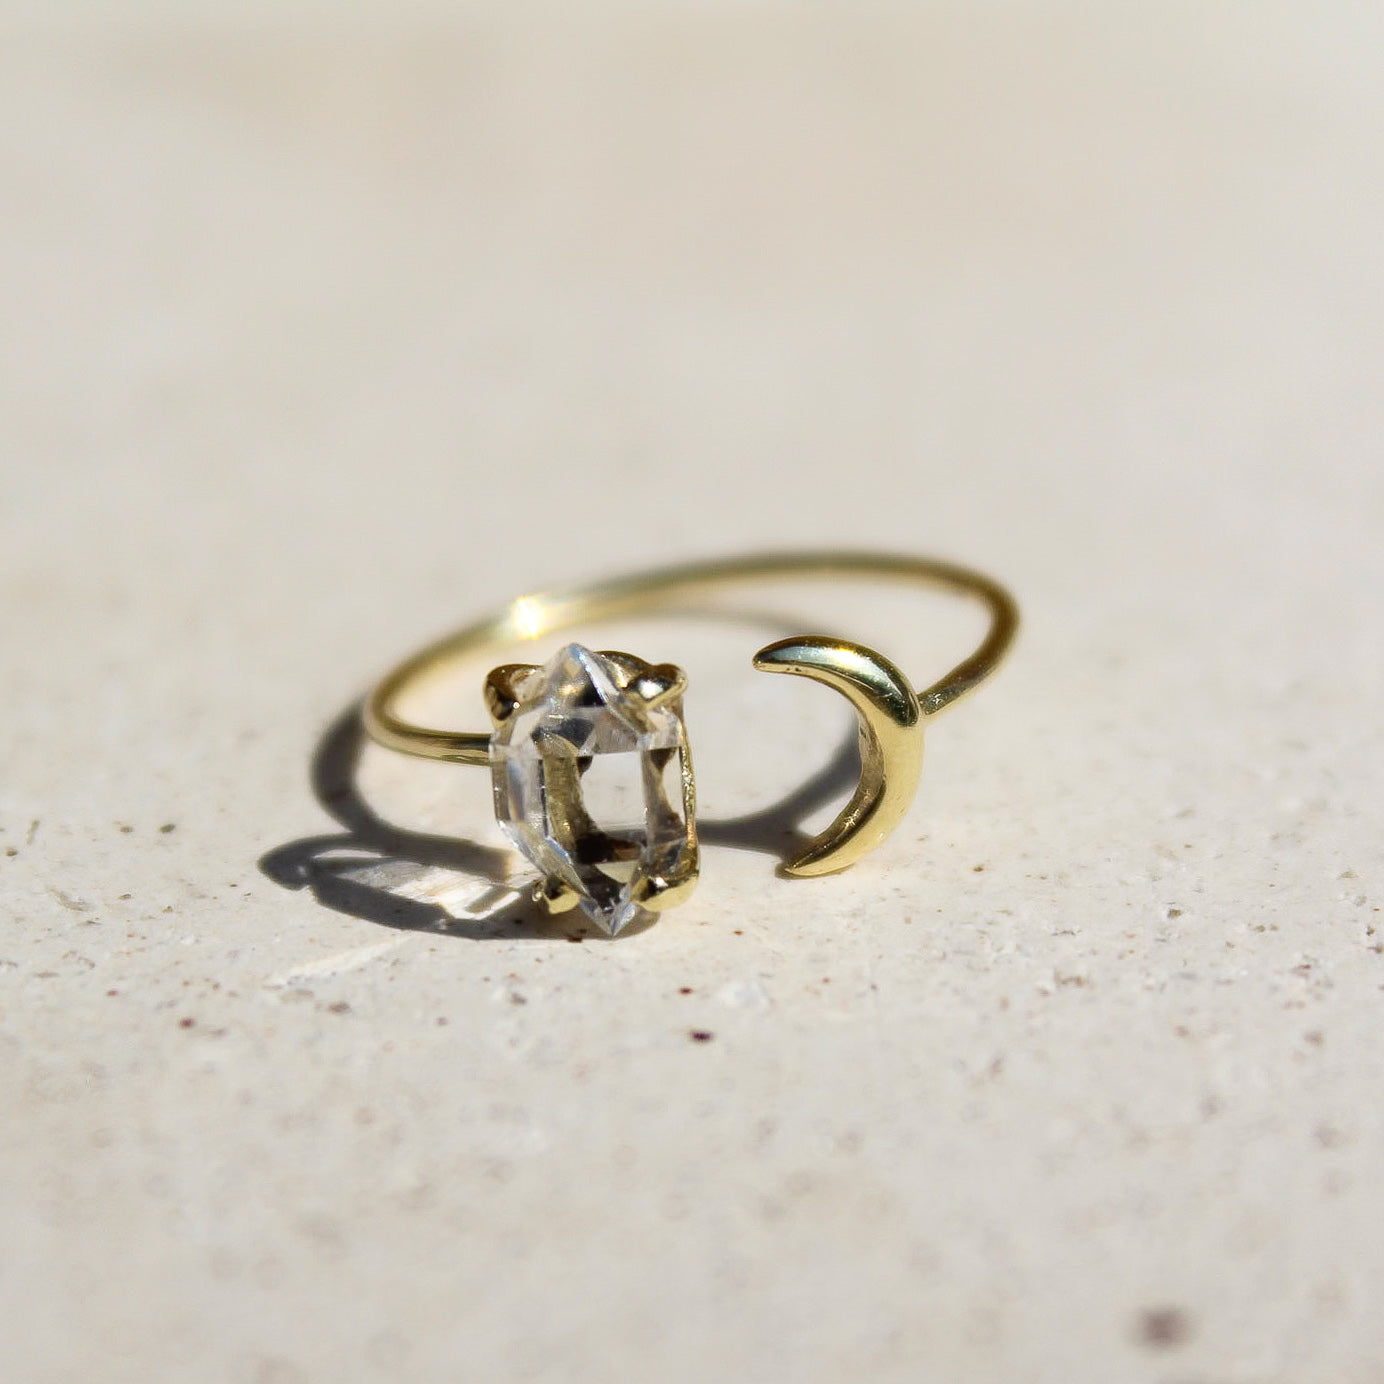 HALF MOON THIN RING - HERKIMER (SOLID GOLD 18K)